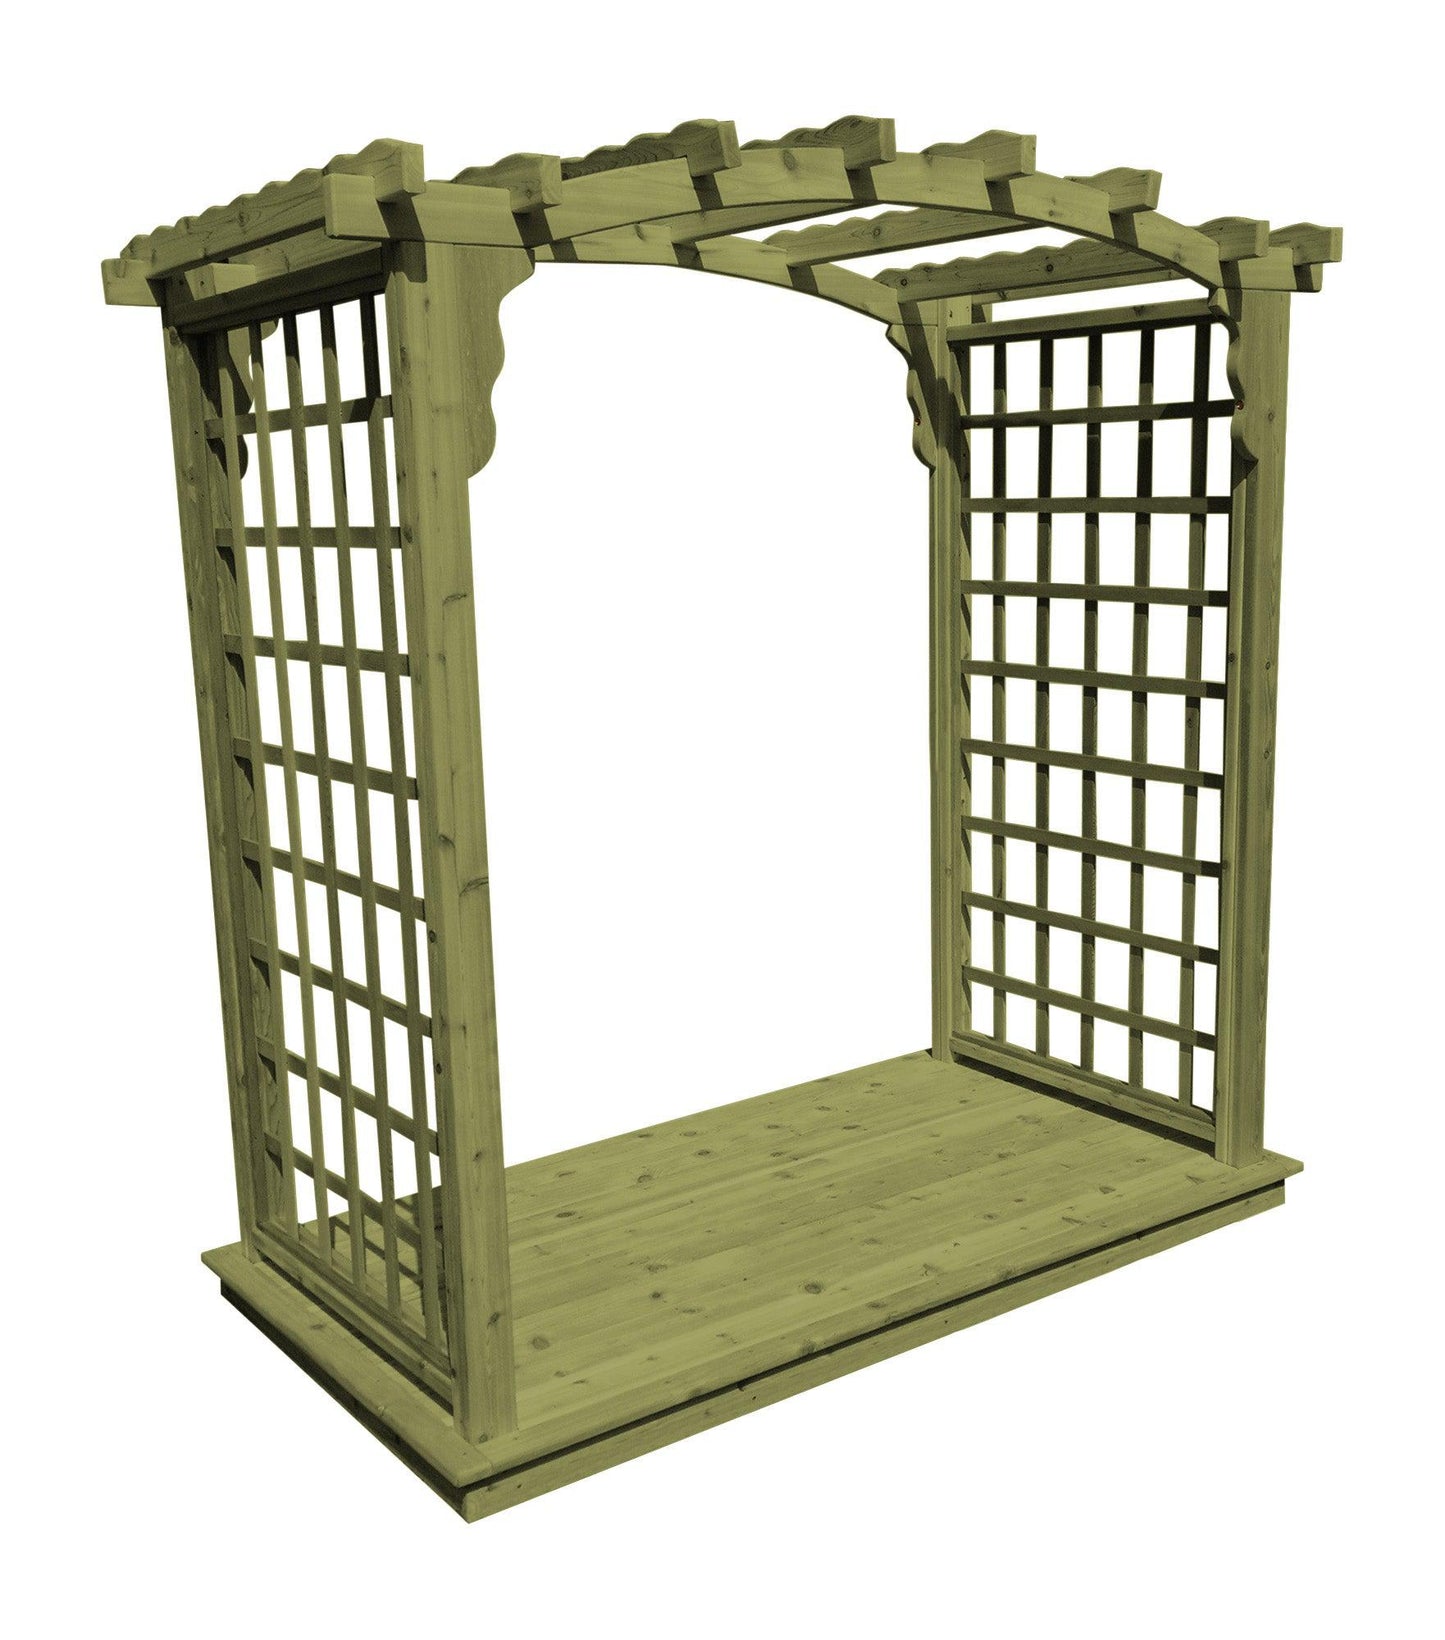 A&L Furniture Co. Western Red Cedar 6' Cambridge Arbor & Deck - LEAD TIME TO SHIP 4 WEEKS OR LESS